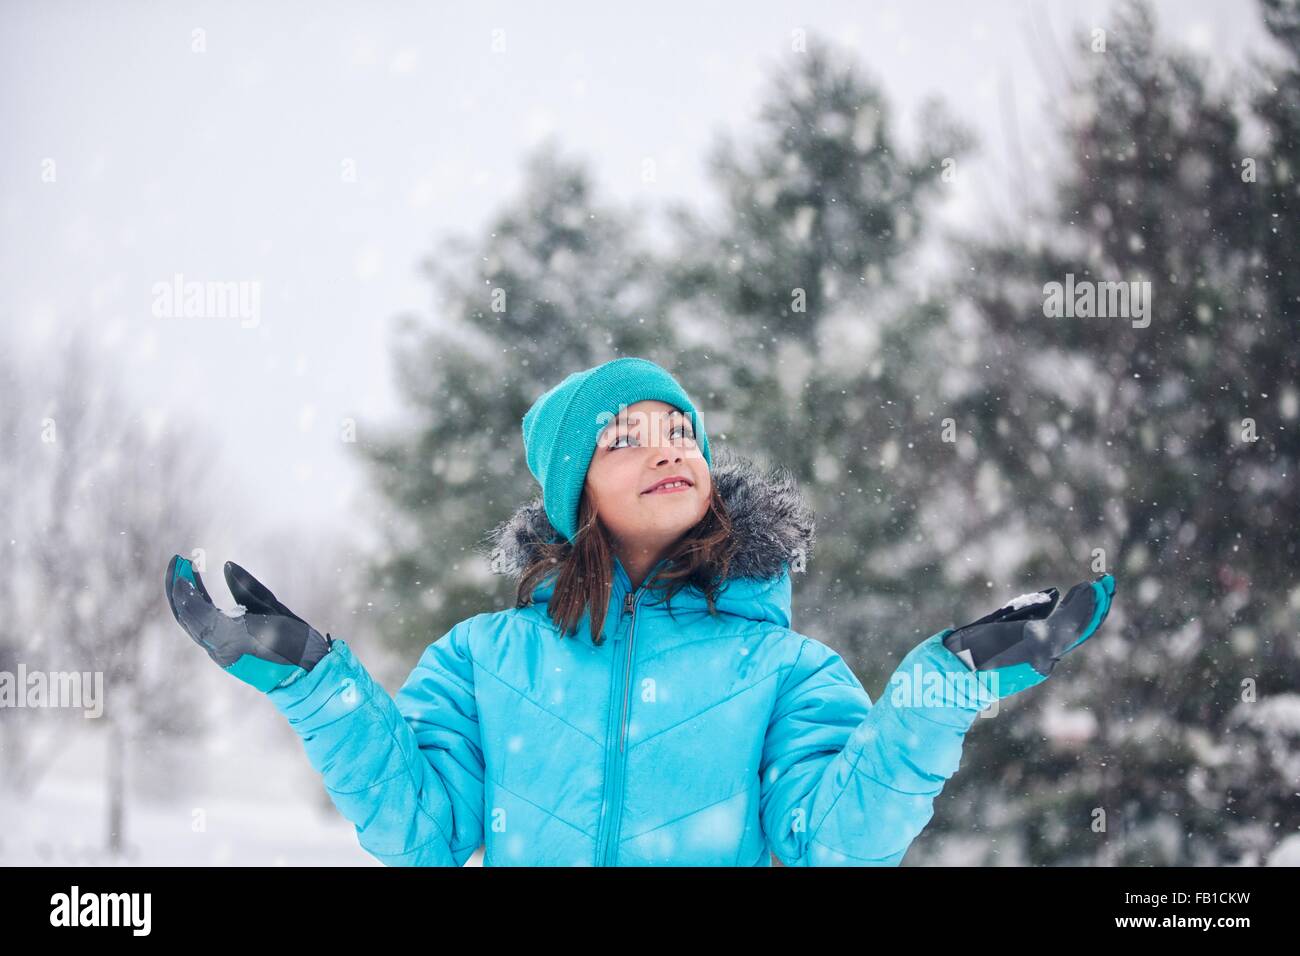 Girl wearing turquoise knit hat and coat, arms raised, hands out catching snow, looking up smiling Stock Photo